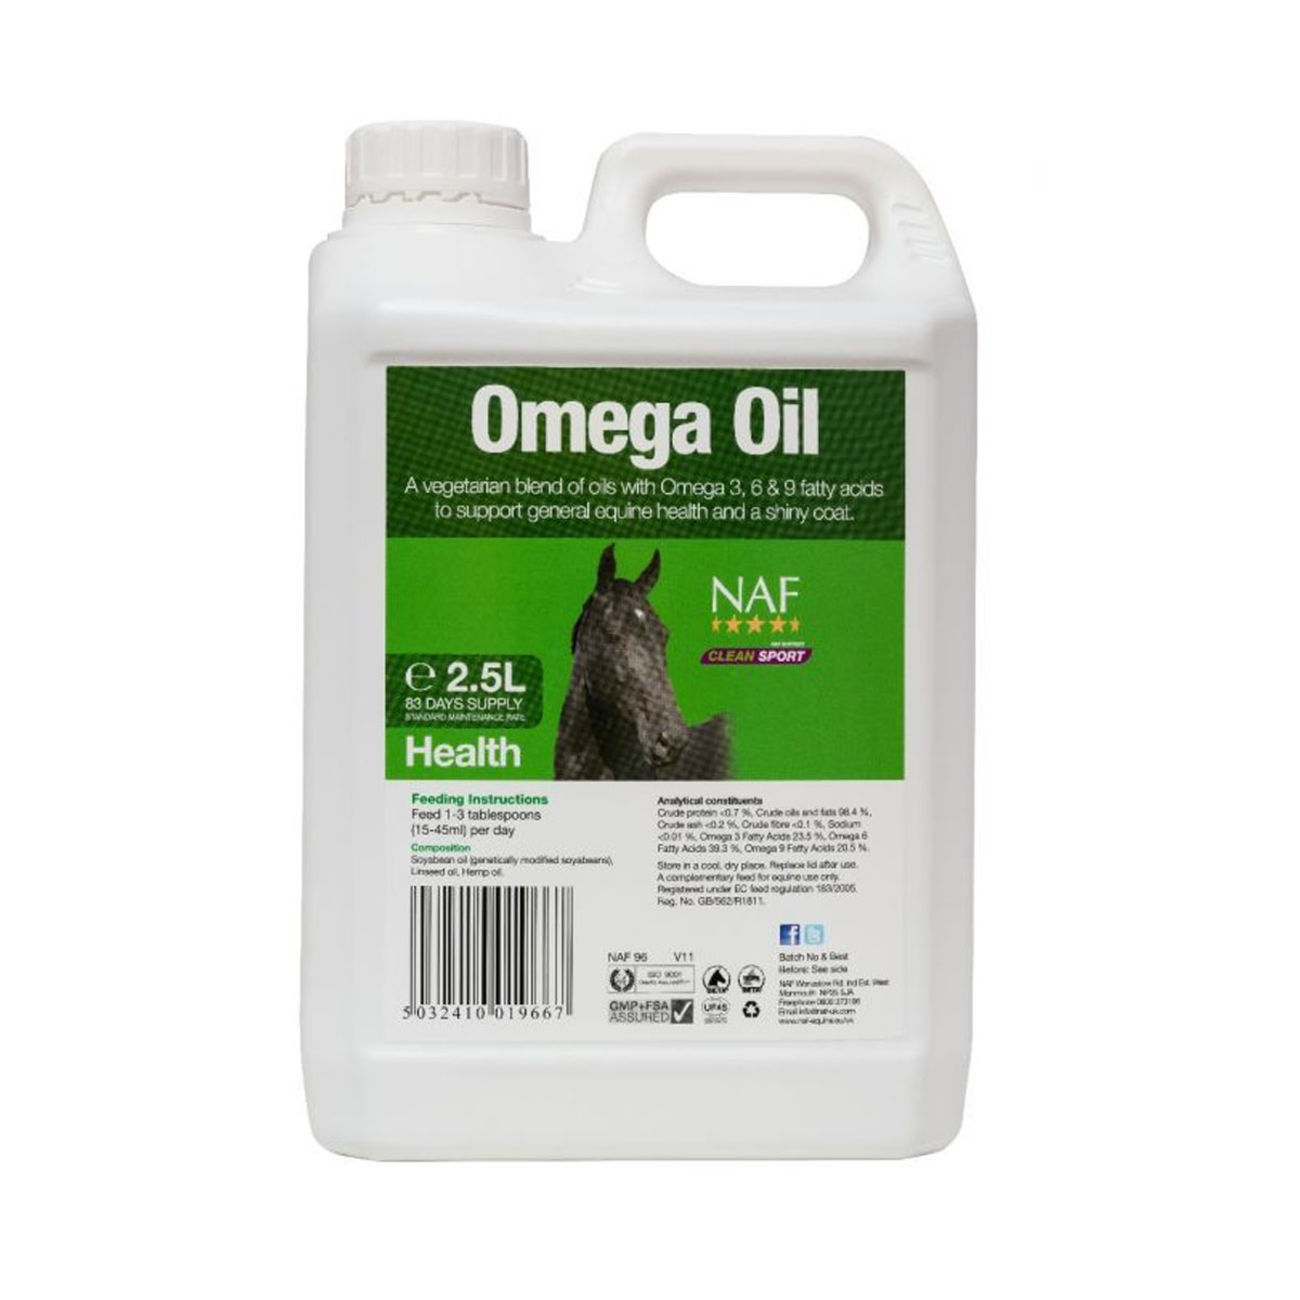 Linseed oil for horses - HorseFlex - Rich in omega 3 and 6 fatty acids